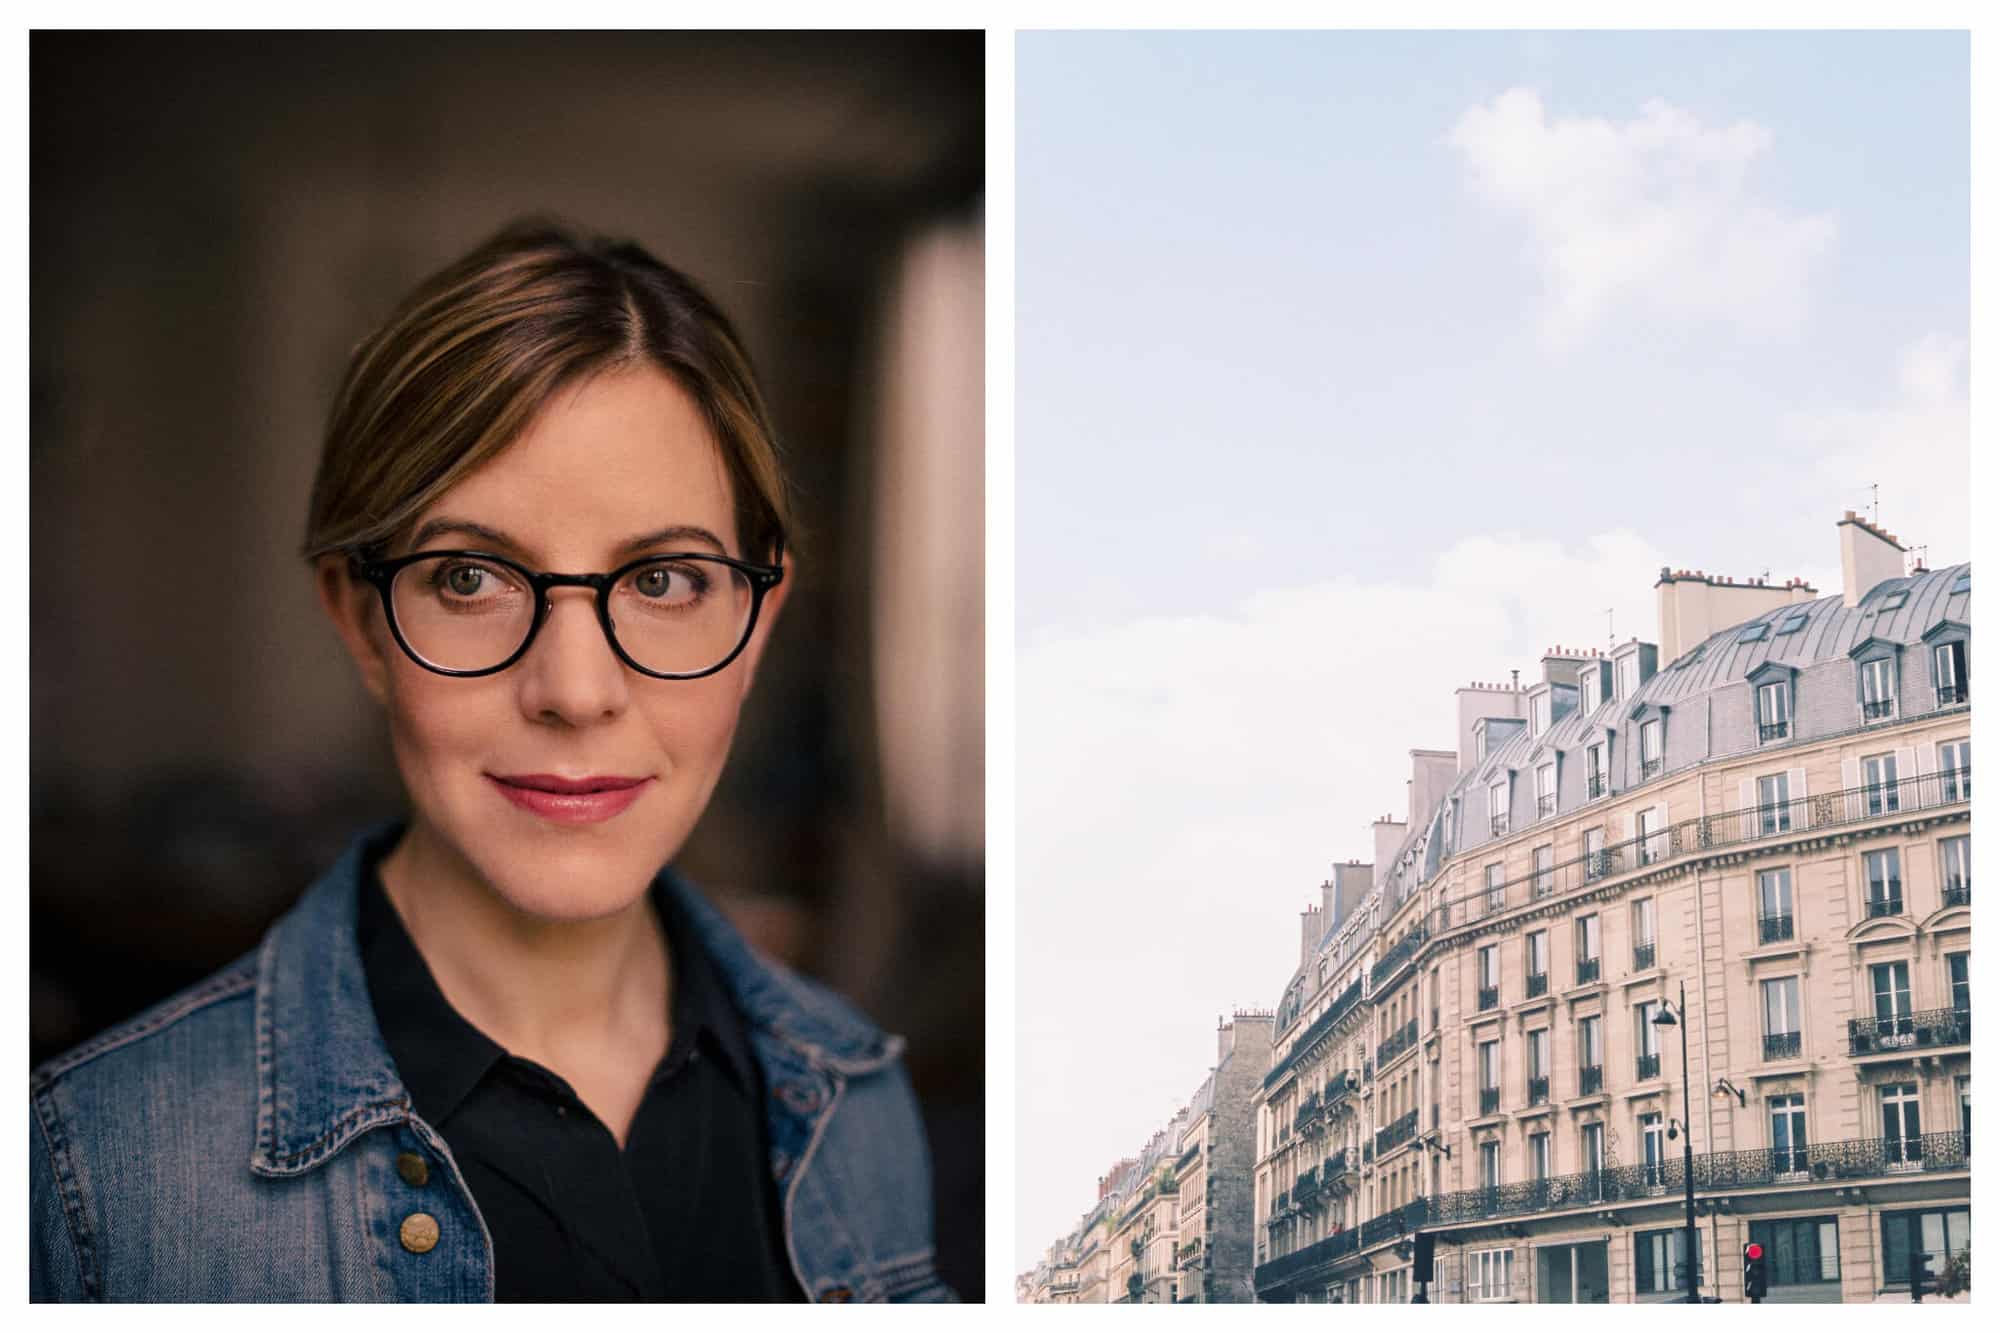 Left: Pamela Druckerman. Right: The outside of a traditional building in Paris.